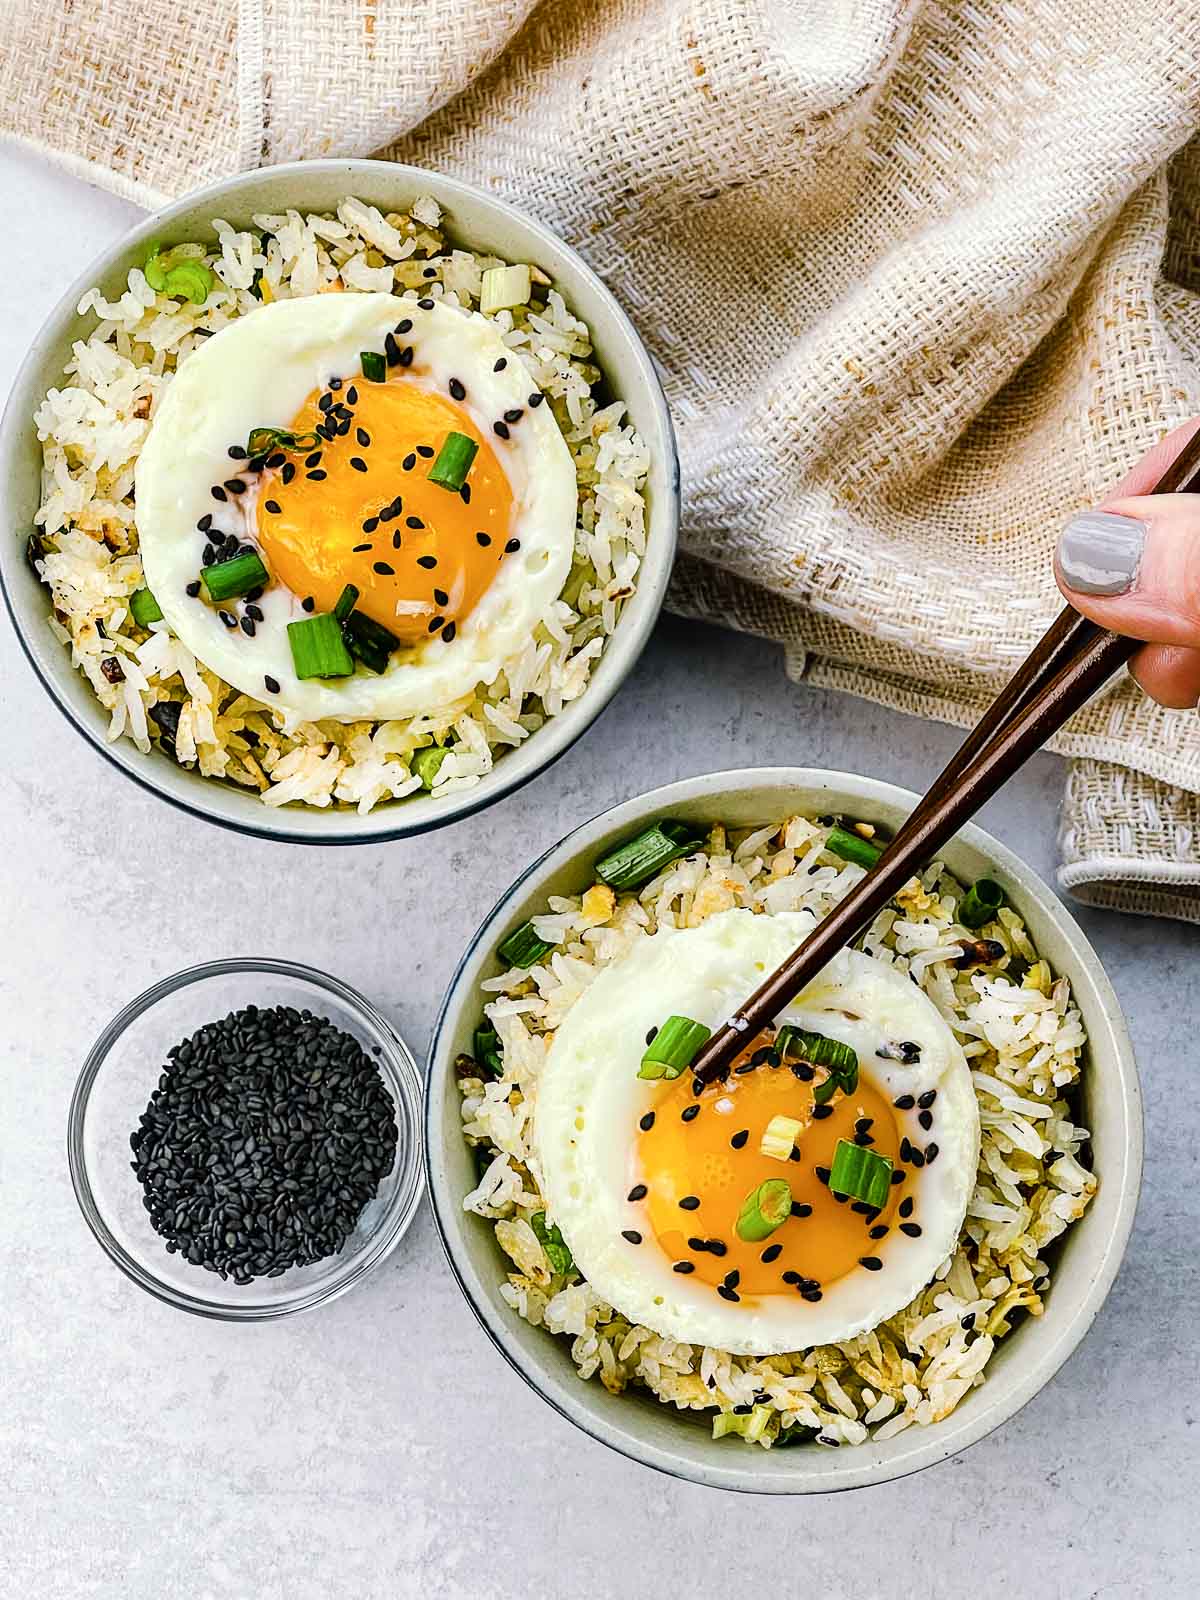 Crispy rice with ginger and scallions topped with a runny fried egg in two small bowls with a pair of brown chopsticks, a linen napkin, and black sesame seeds in a bowl on the side.